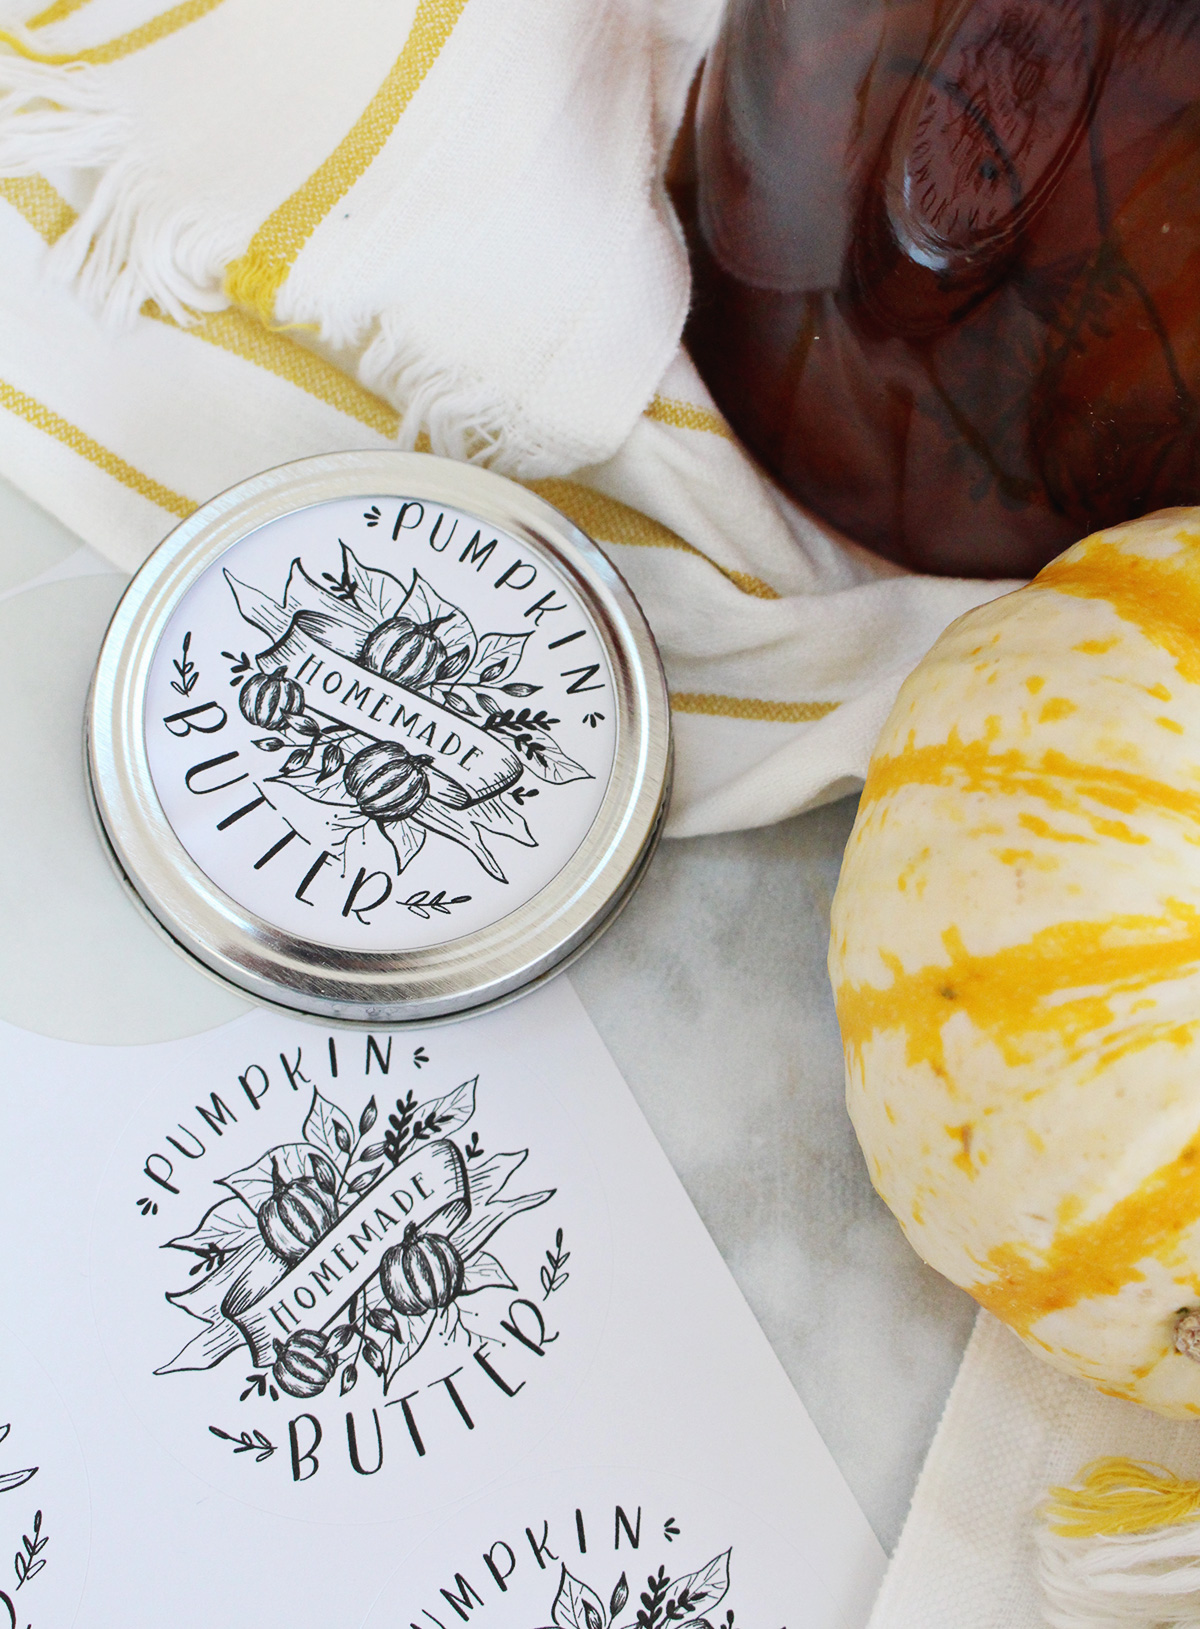 Food Gift Idea: Send a Lily & Val Happy Fall Card + Pumpkin butter packaged in jars topped with our FREE hand-drawn pumpkin butter labels! Simple & sweet